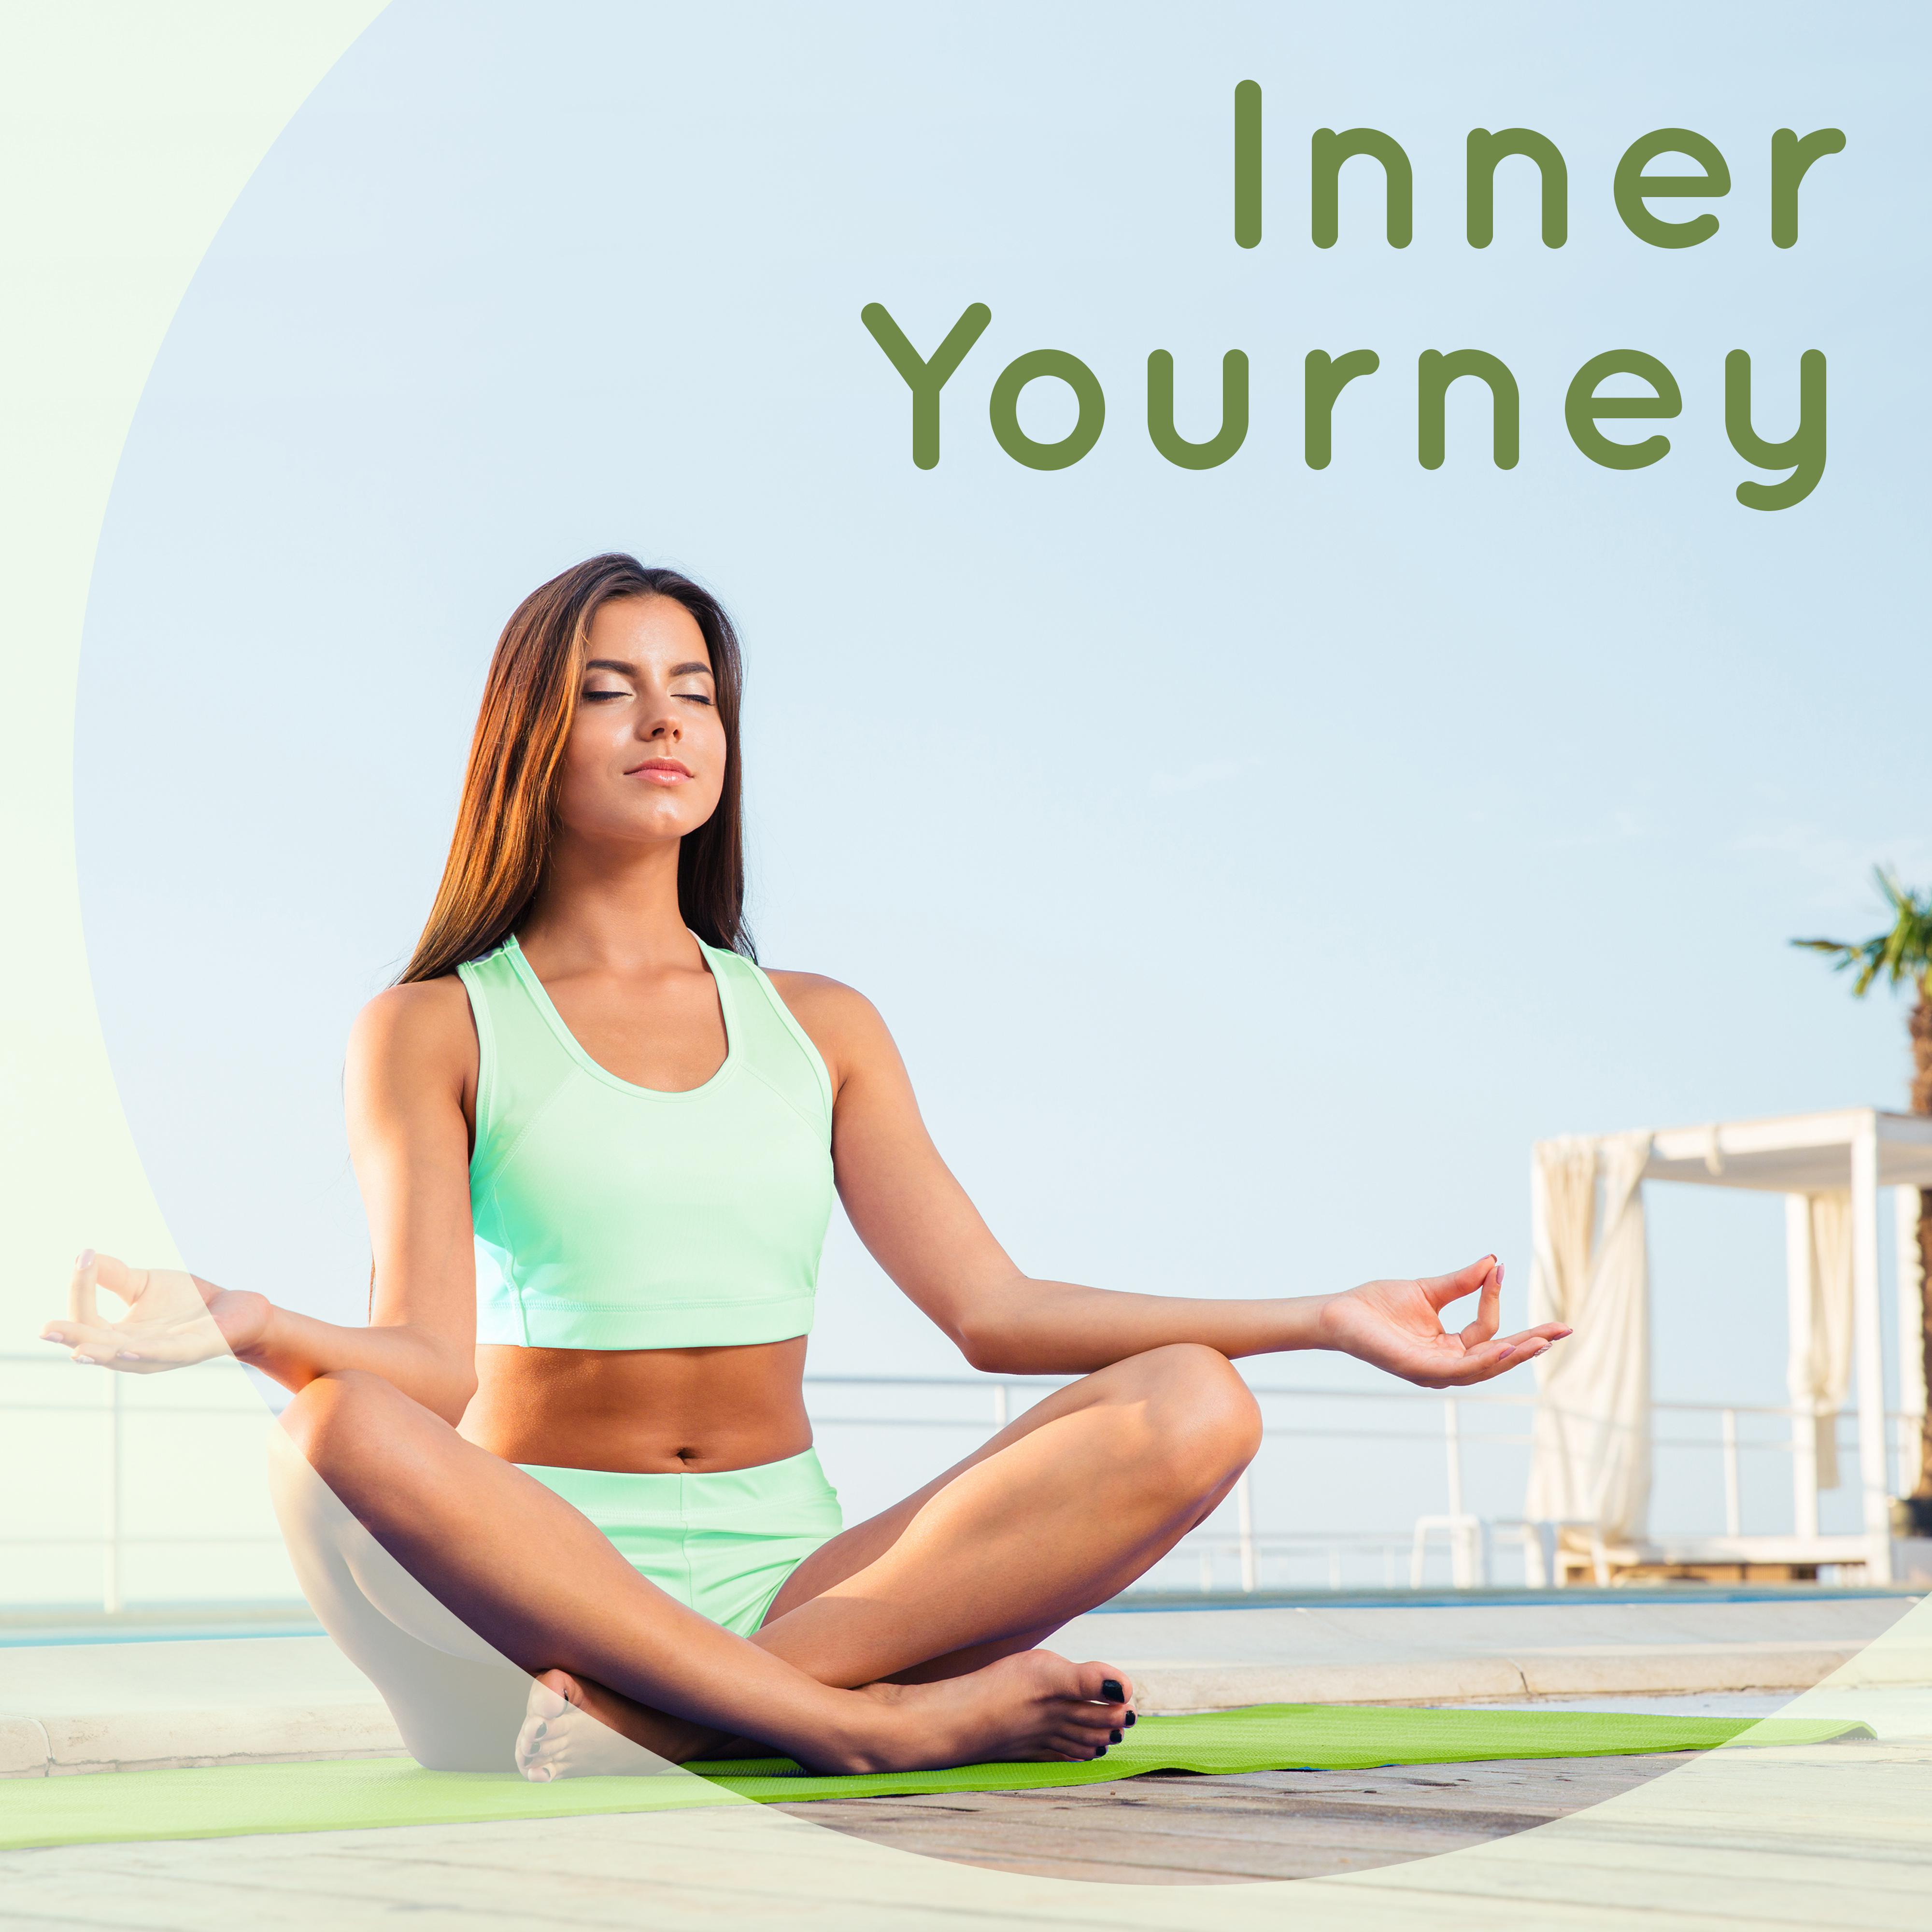 Inner Yourney – Spiritual Music for Meditation, Yoga, Pilates, Healing Nature Sounds, Echoes of Nature